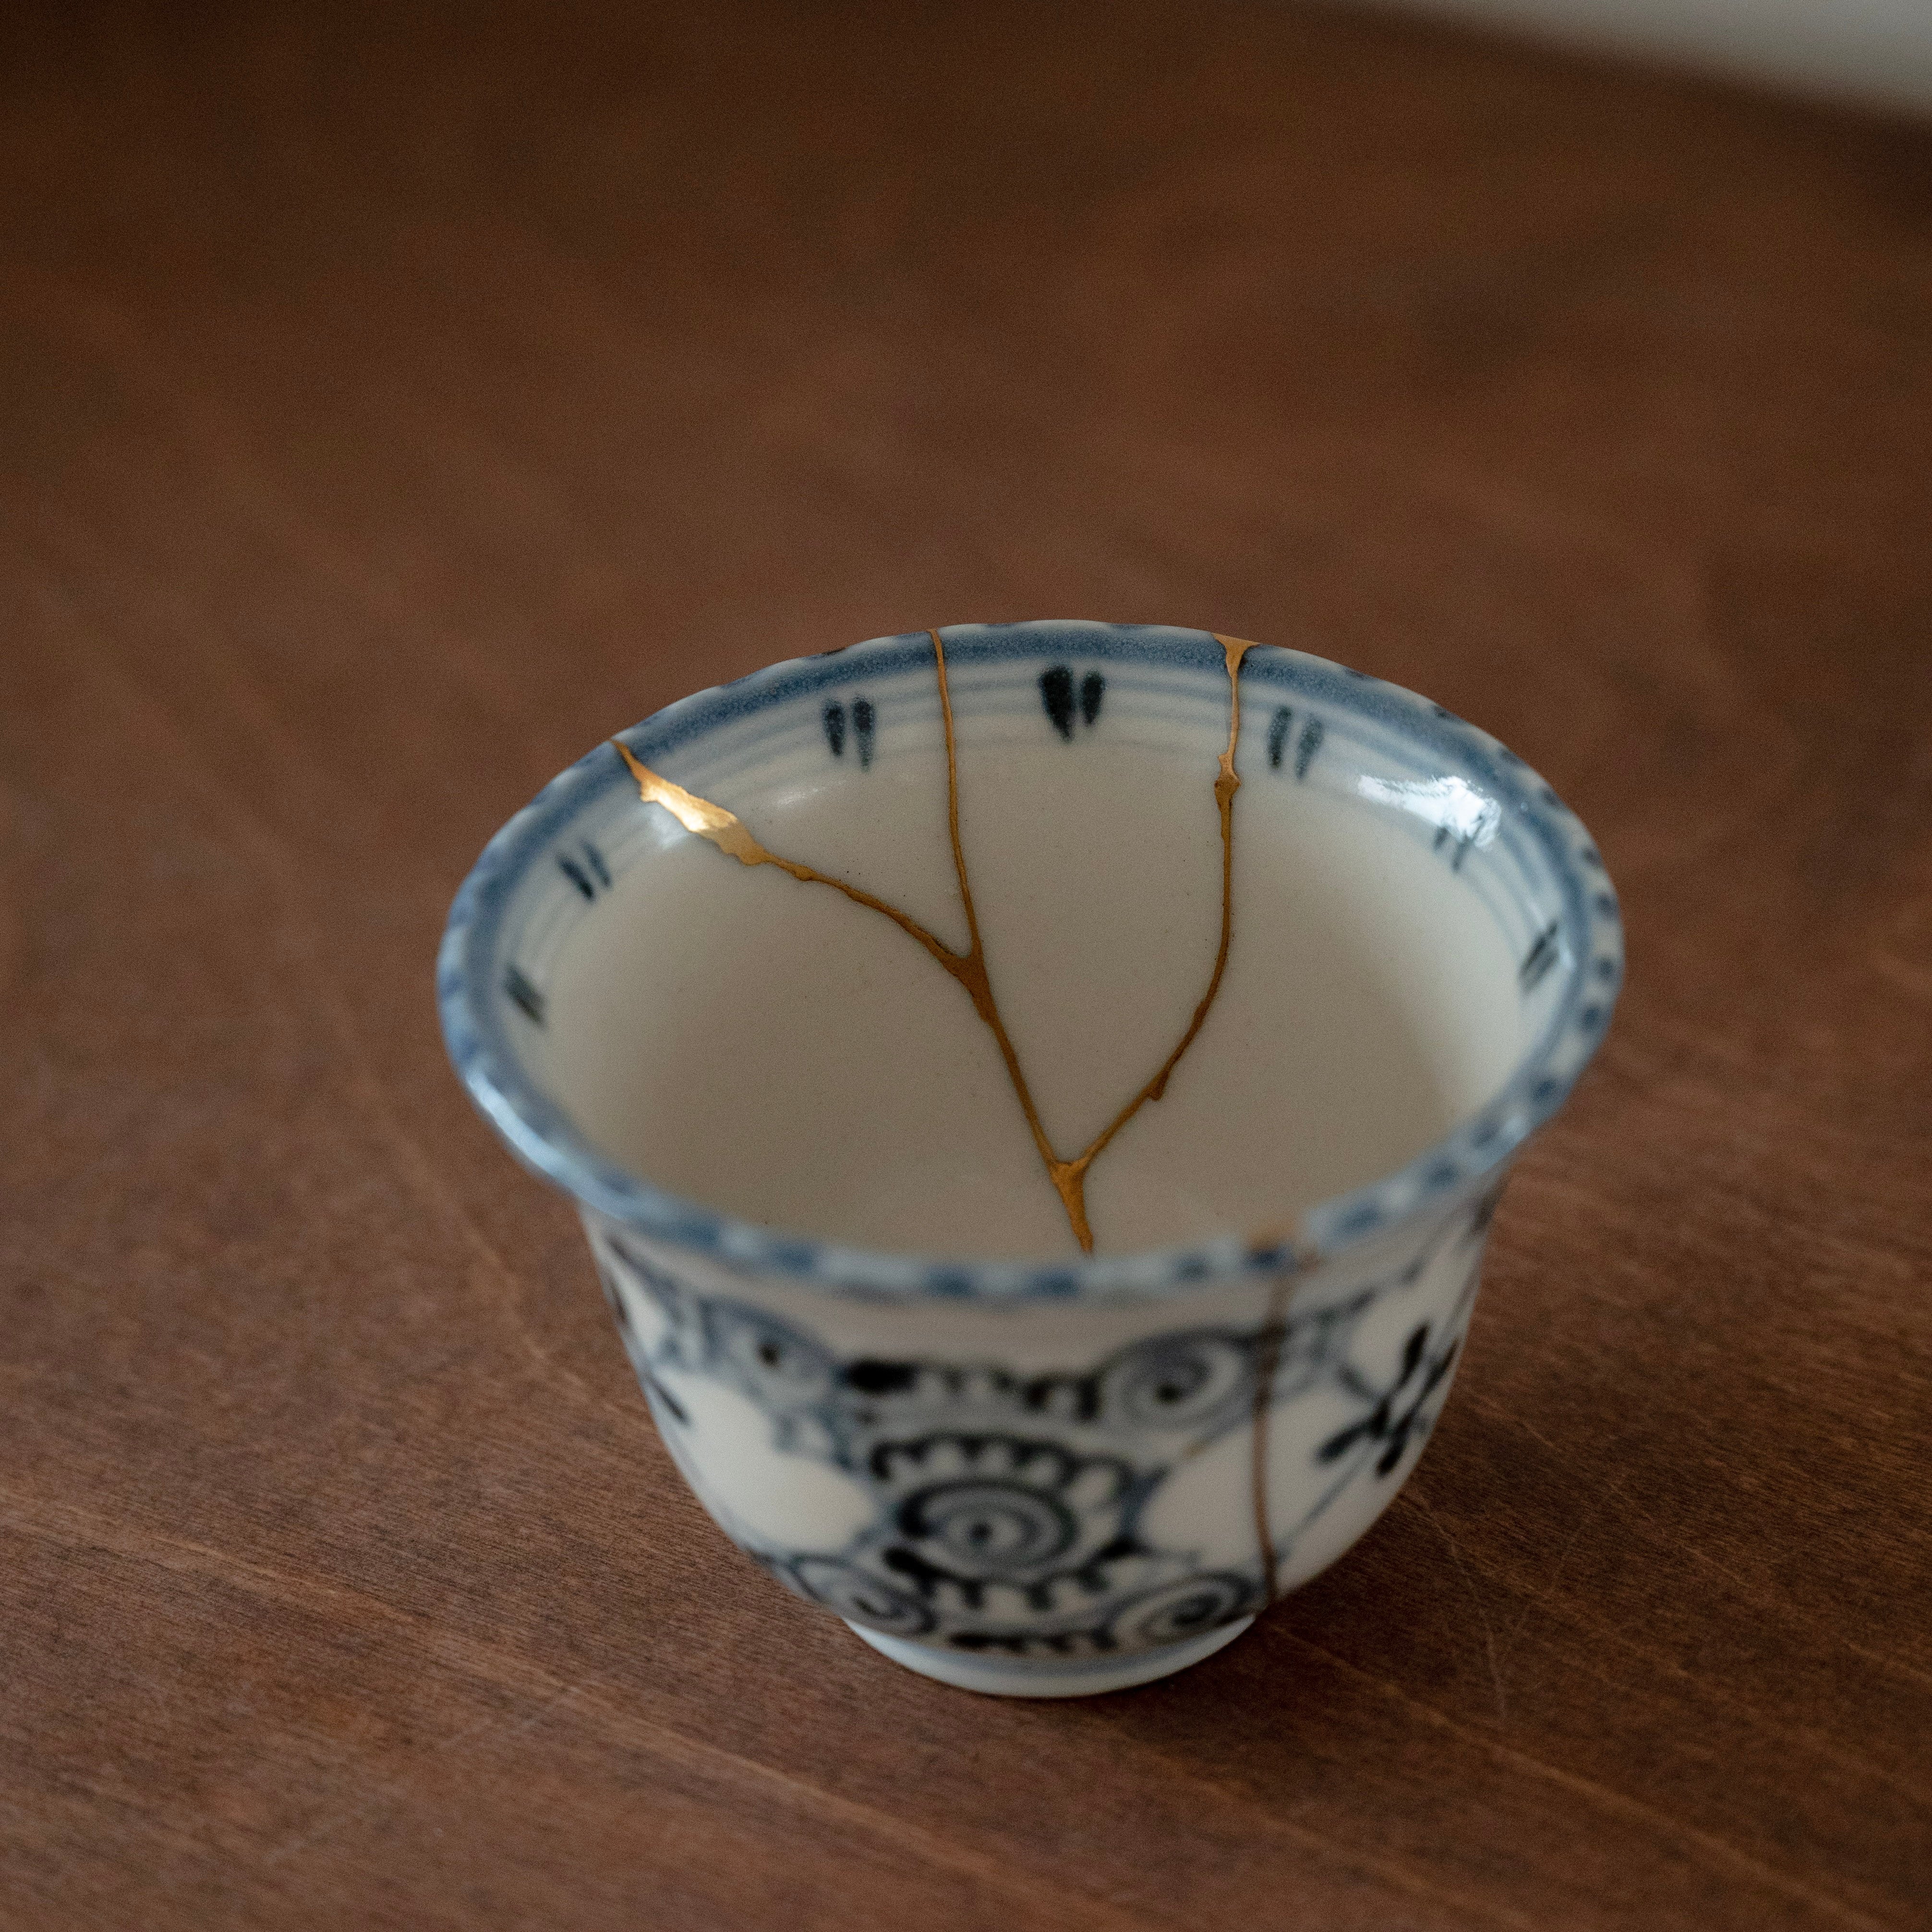 Japanese antique cup with Kintsugi